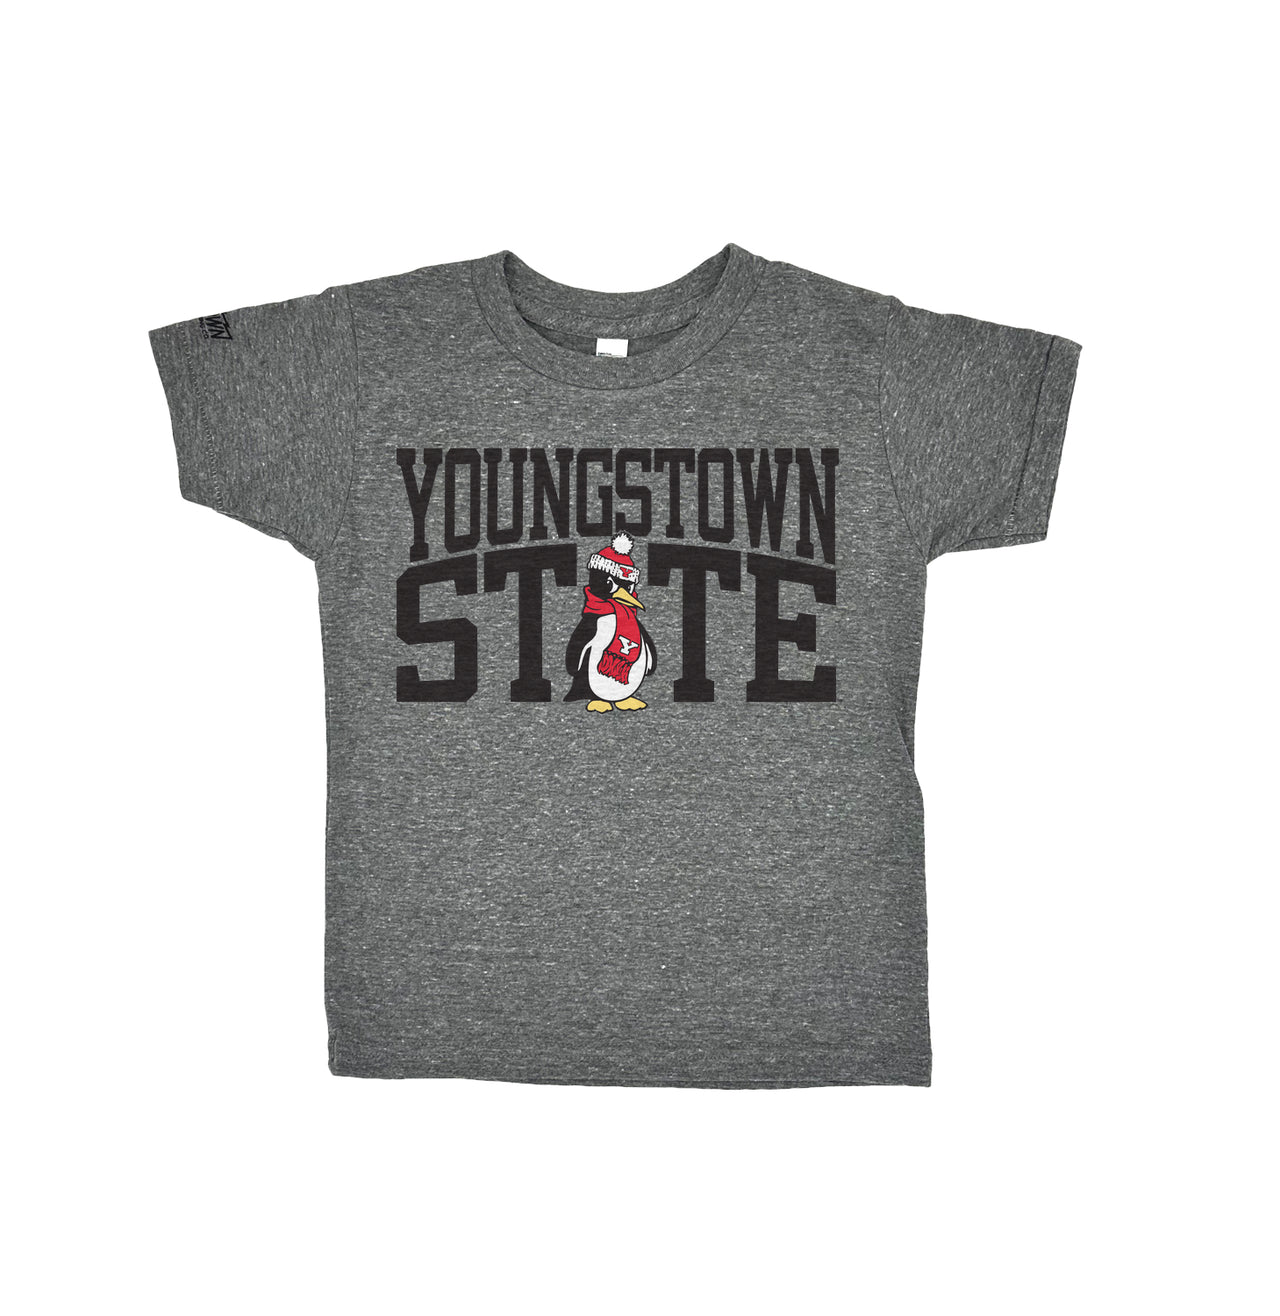 Youngstown State Pete | Kids